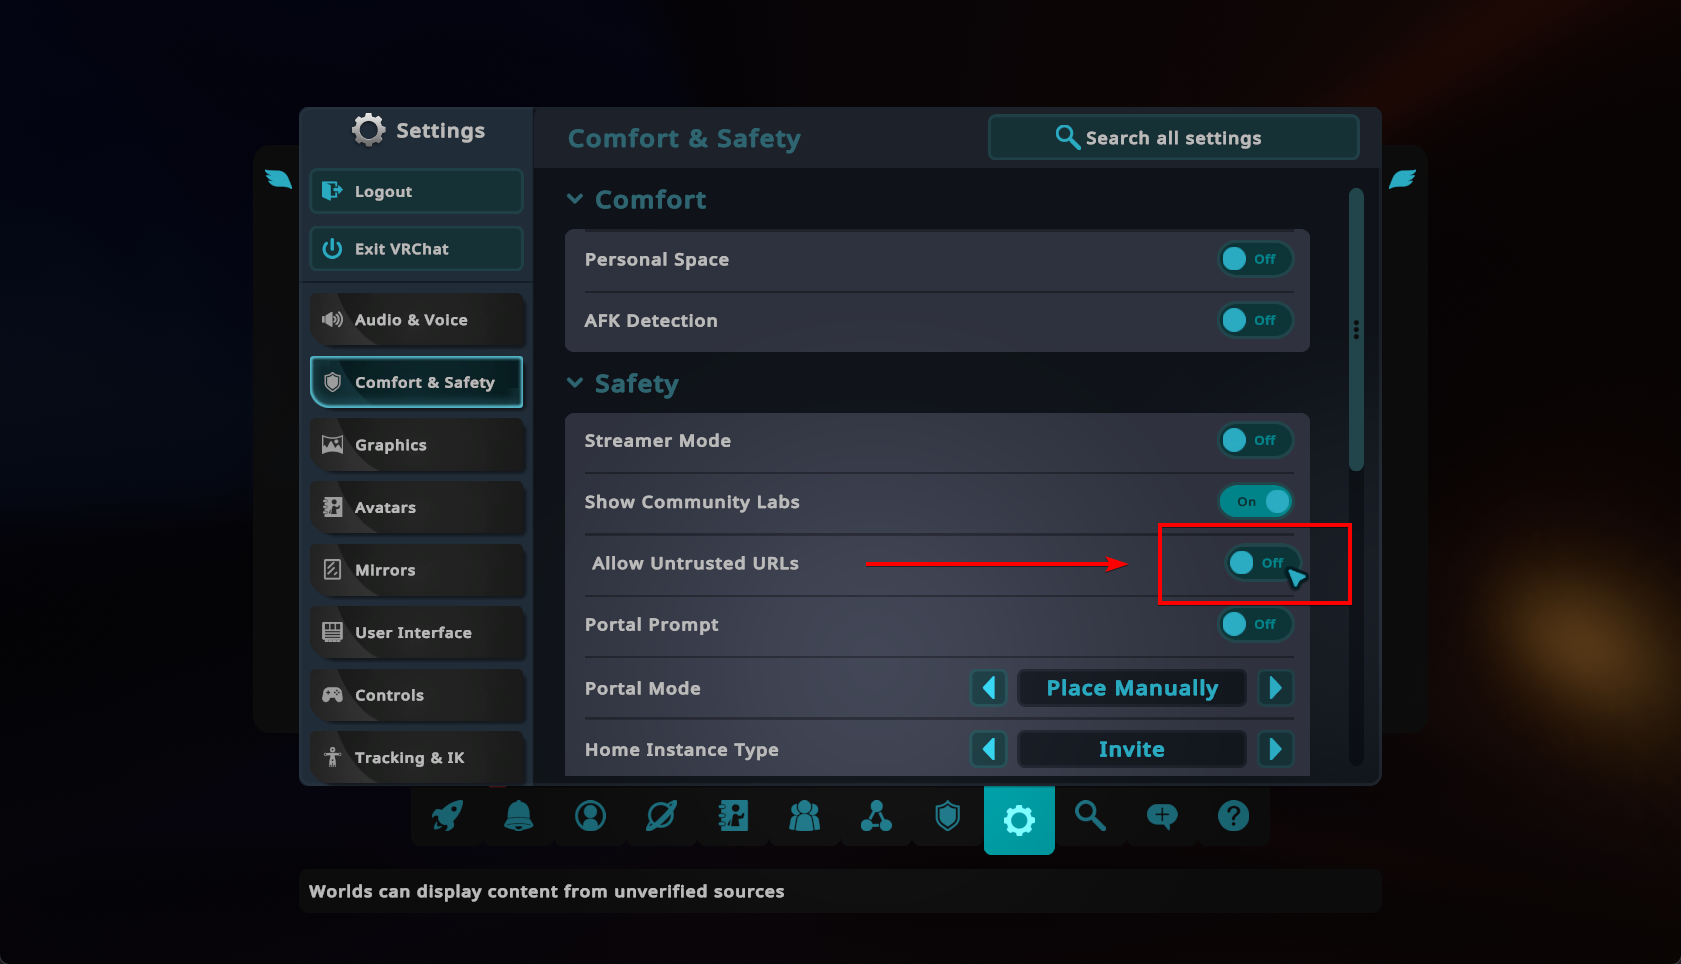 Turning on Allow Untrusted URLs in VRChat's Comfort and Safety tab